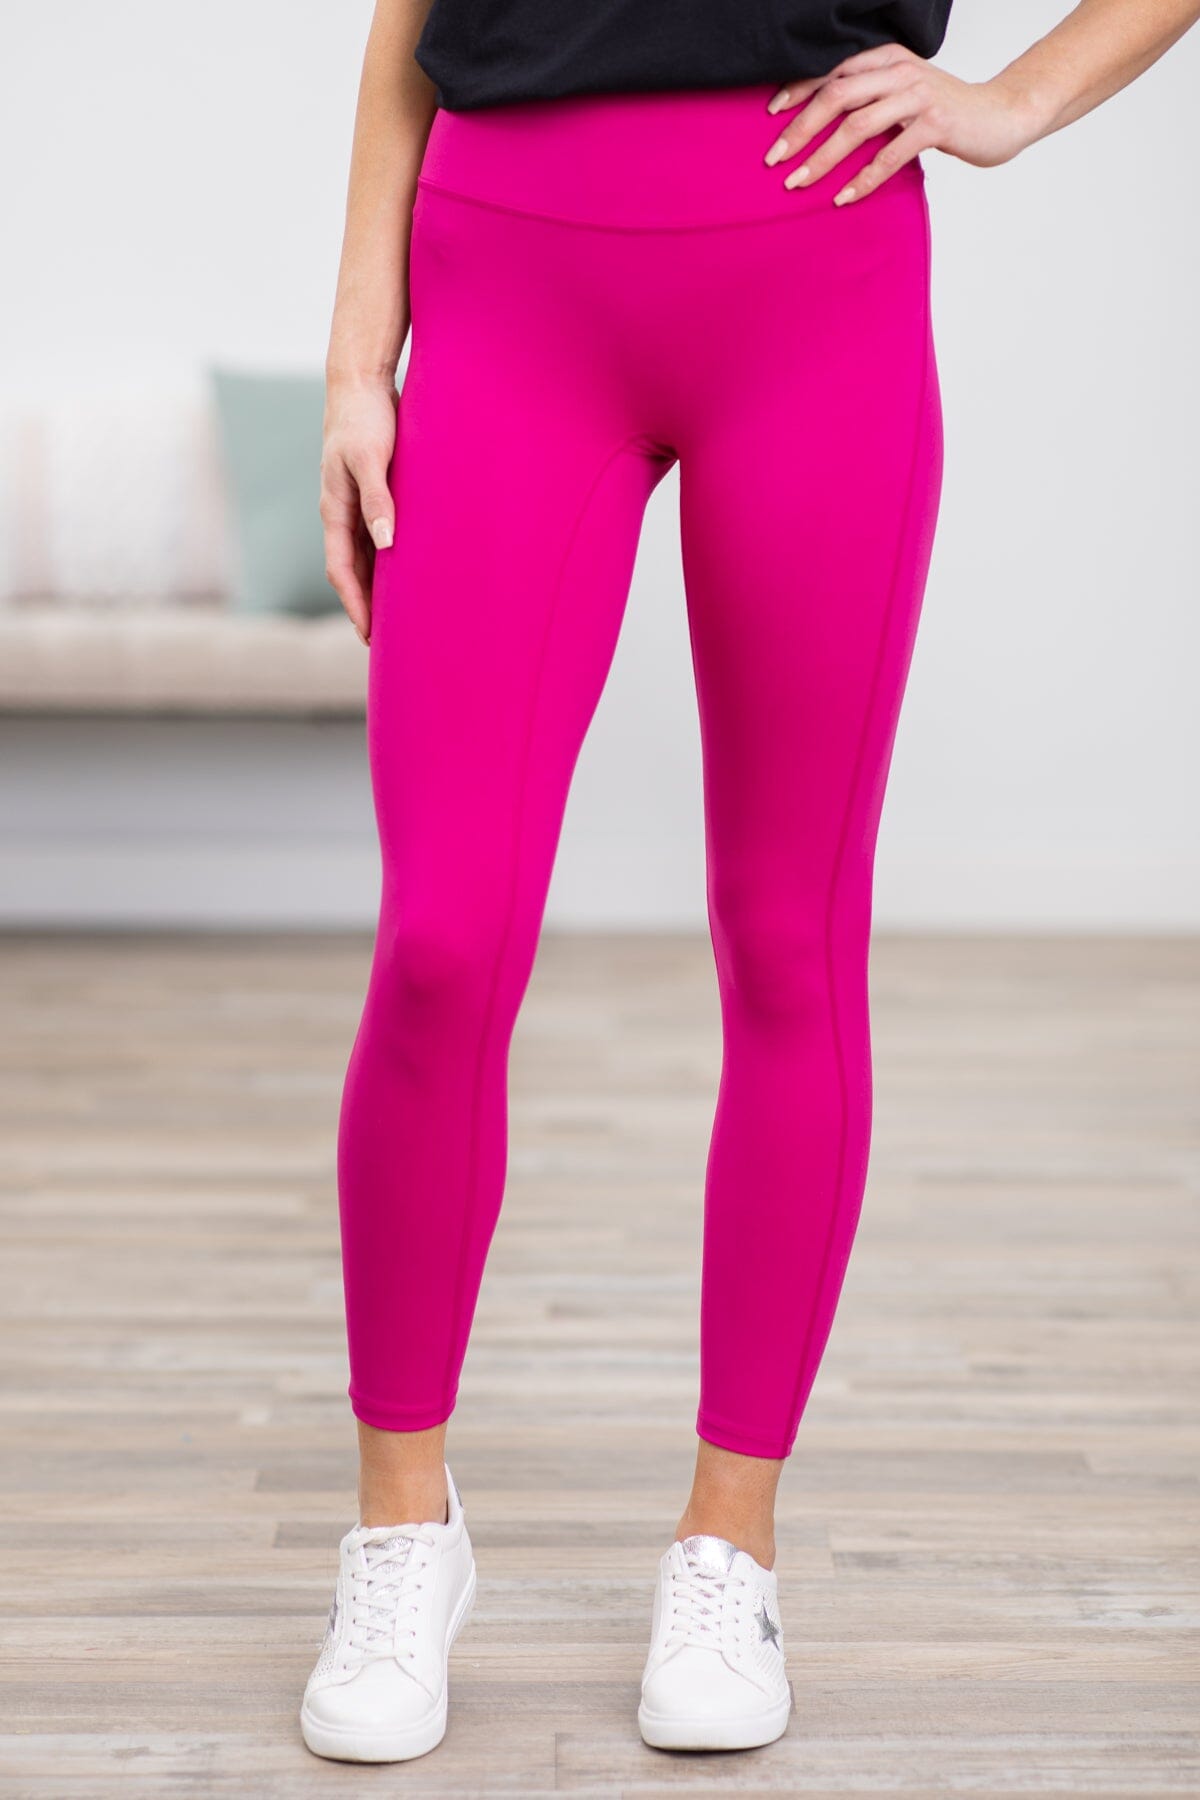 NWT Flirtitude Active Leggings Pink #1 Hi Rise Wide Waistband Stretch Size  XLG